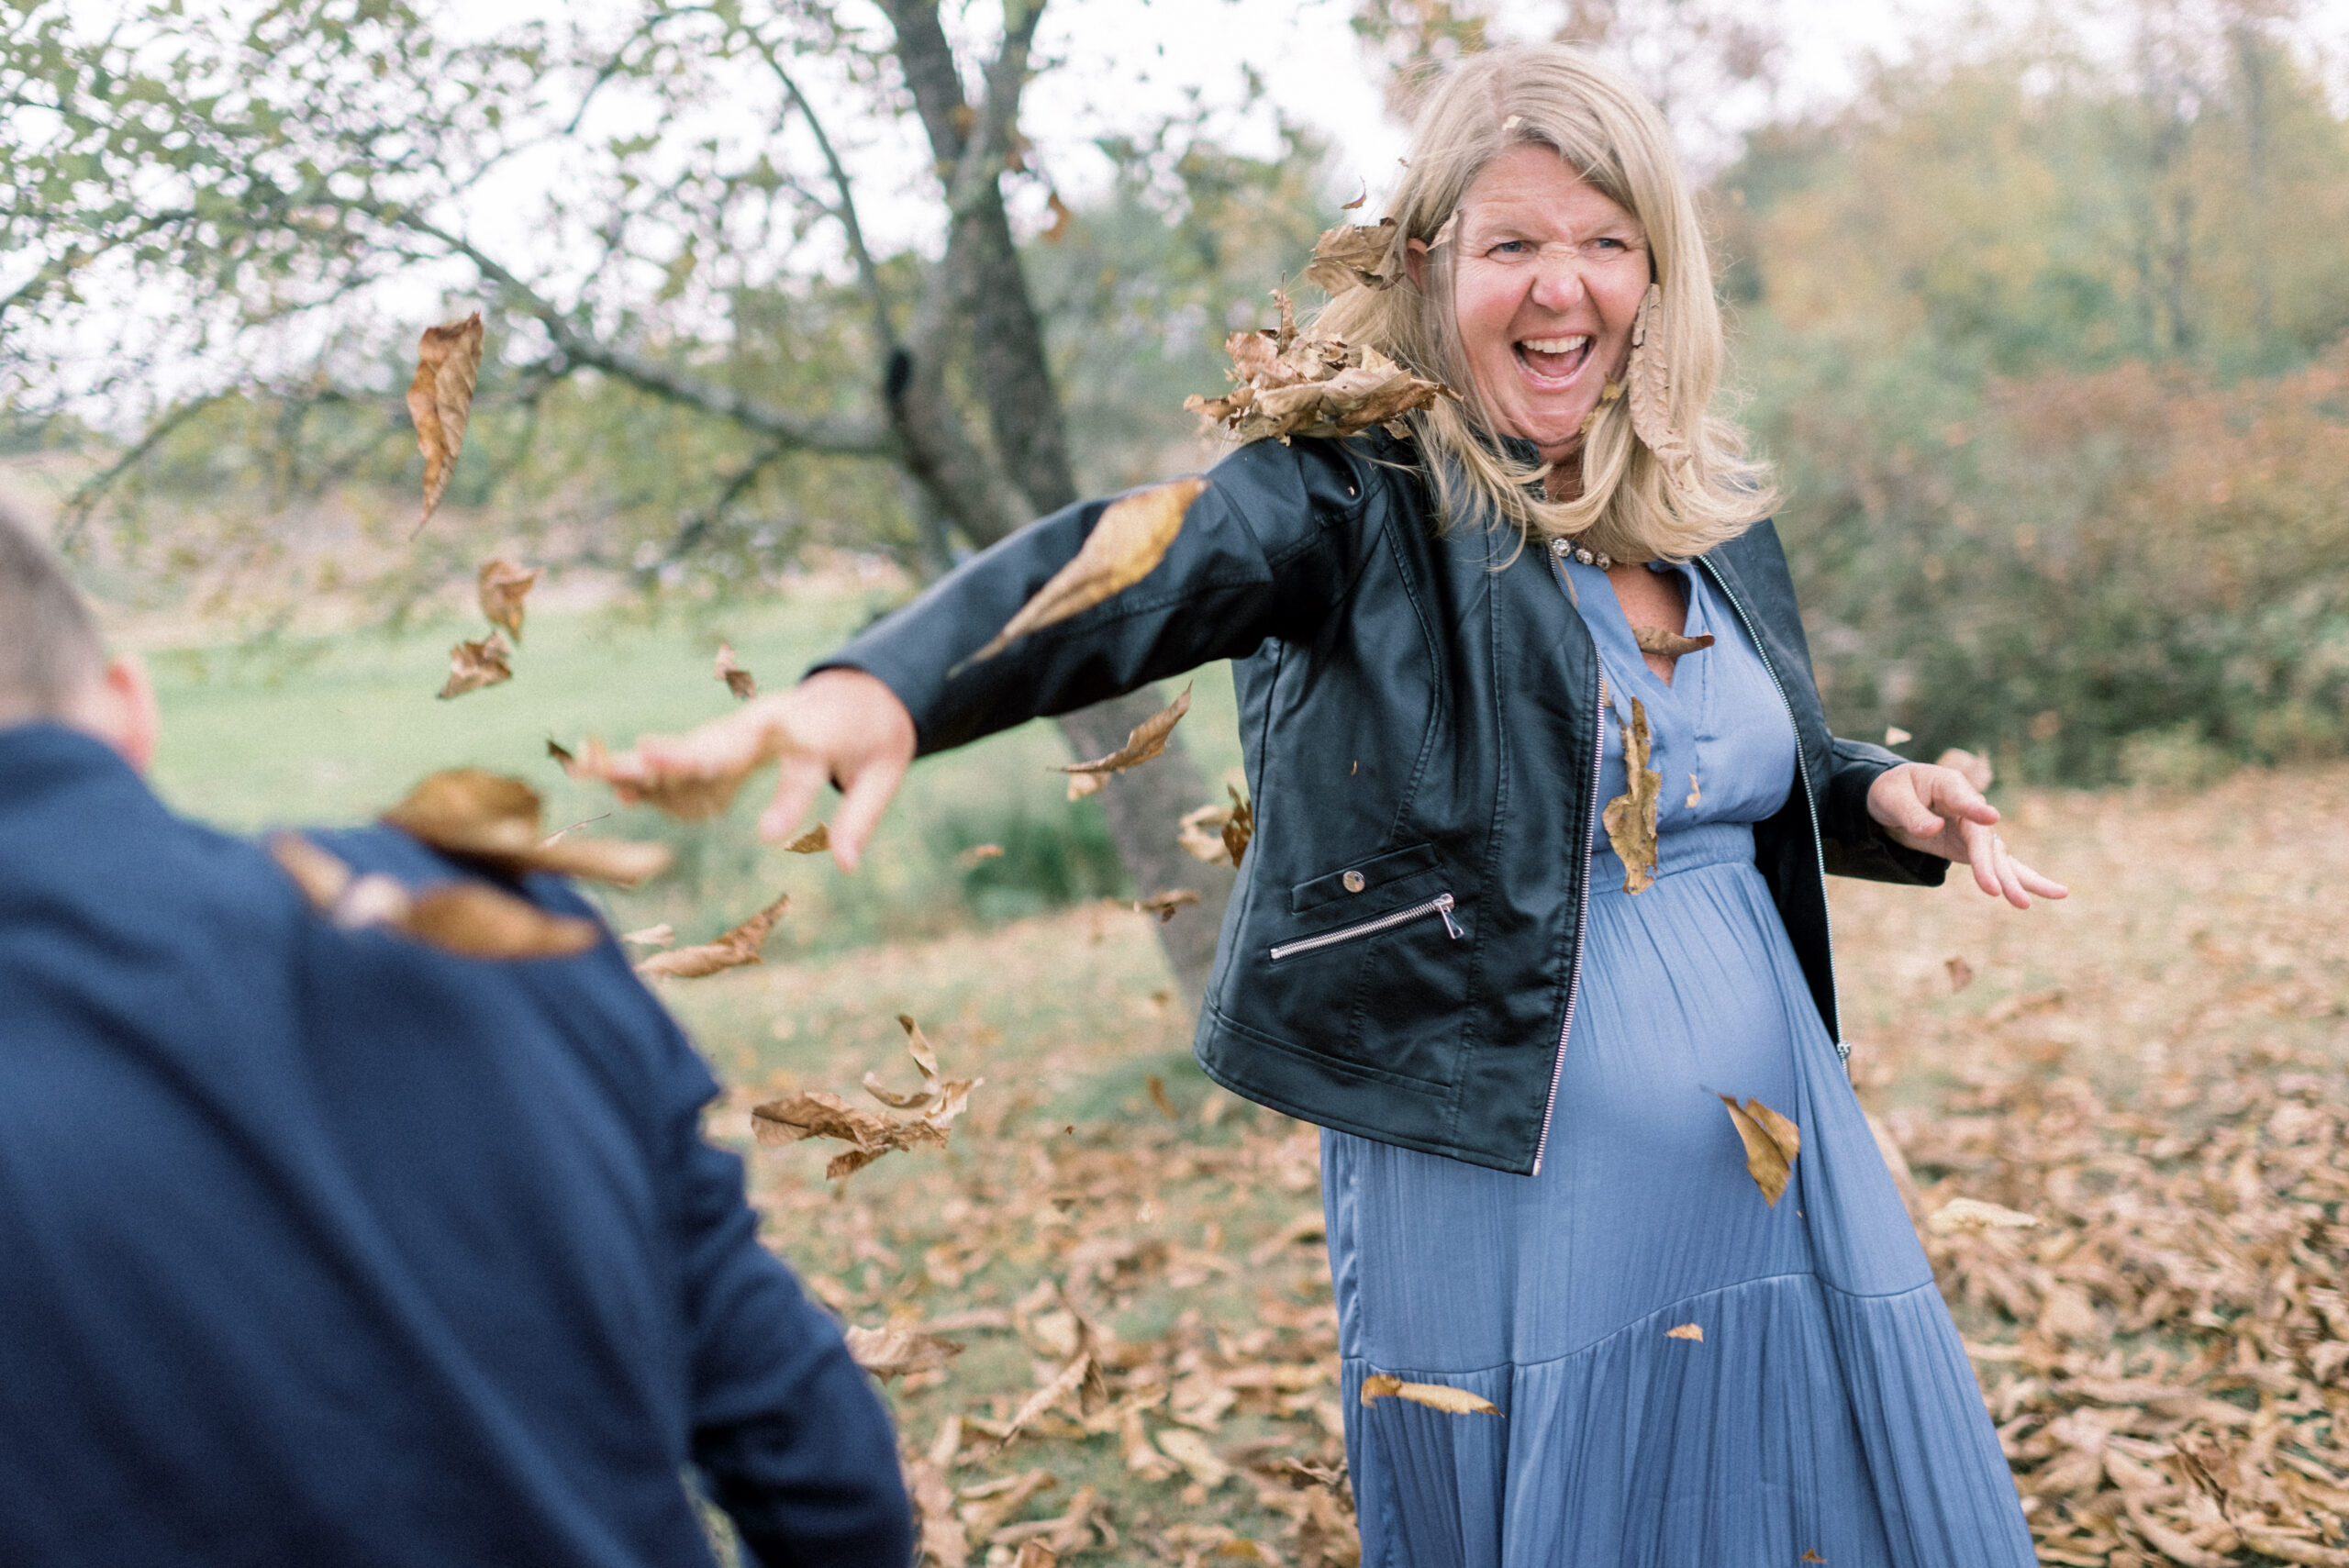 Pennsylvania photographer captures mother playing in leaves with kids